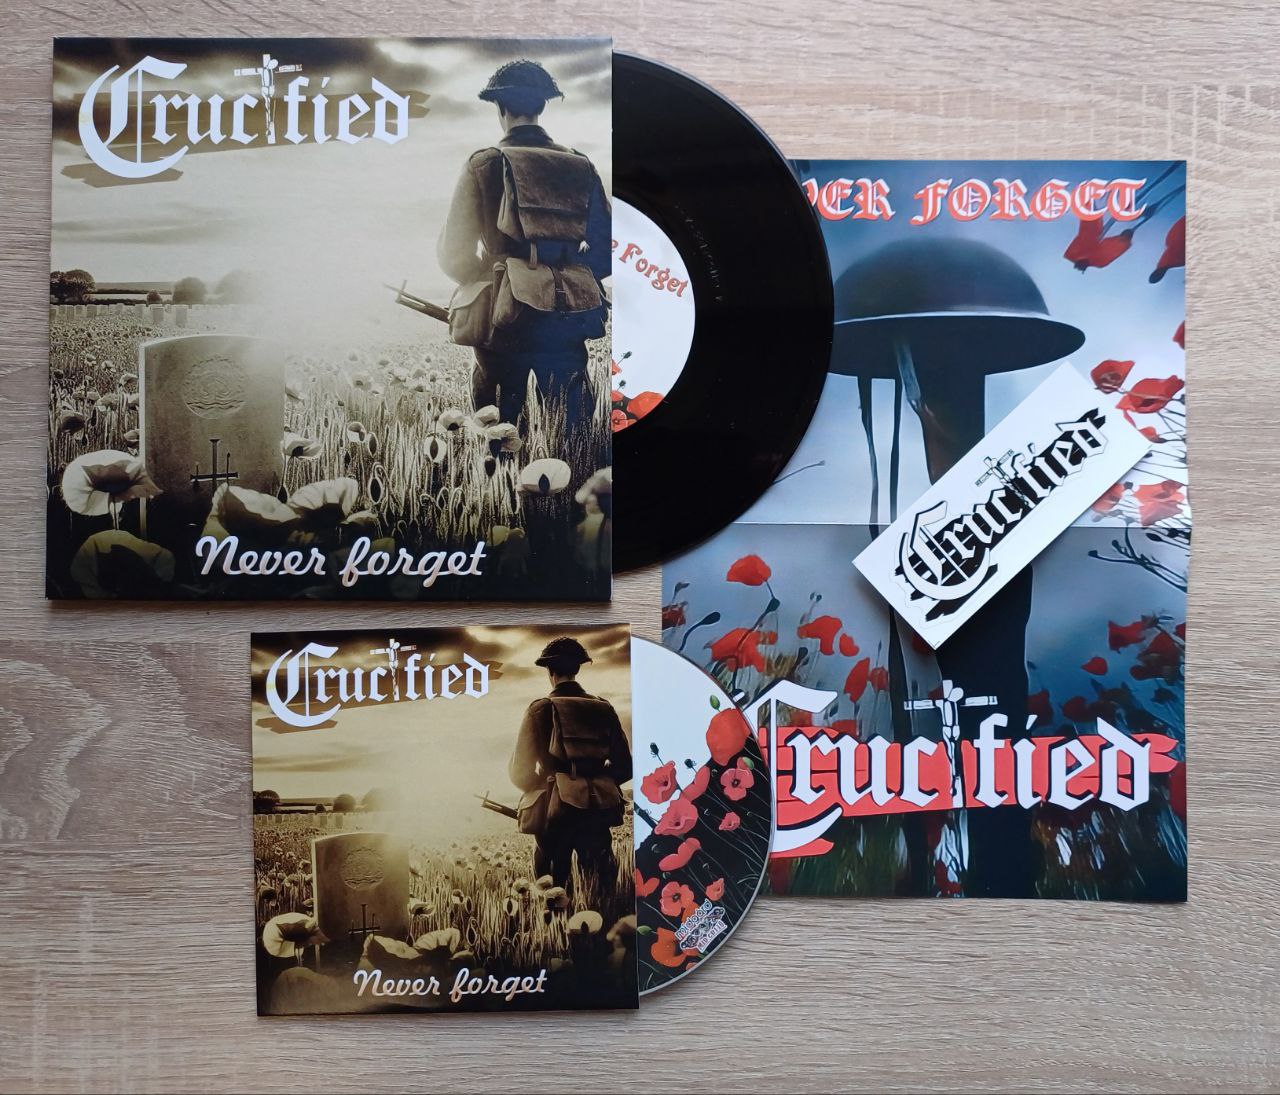 Crucified "Never forget" EP + CD